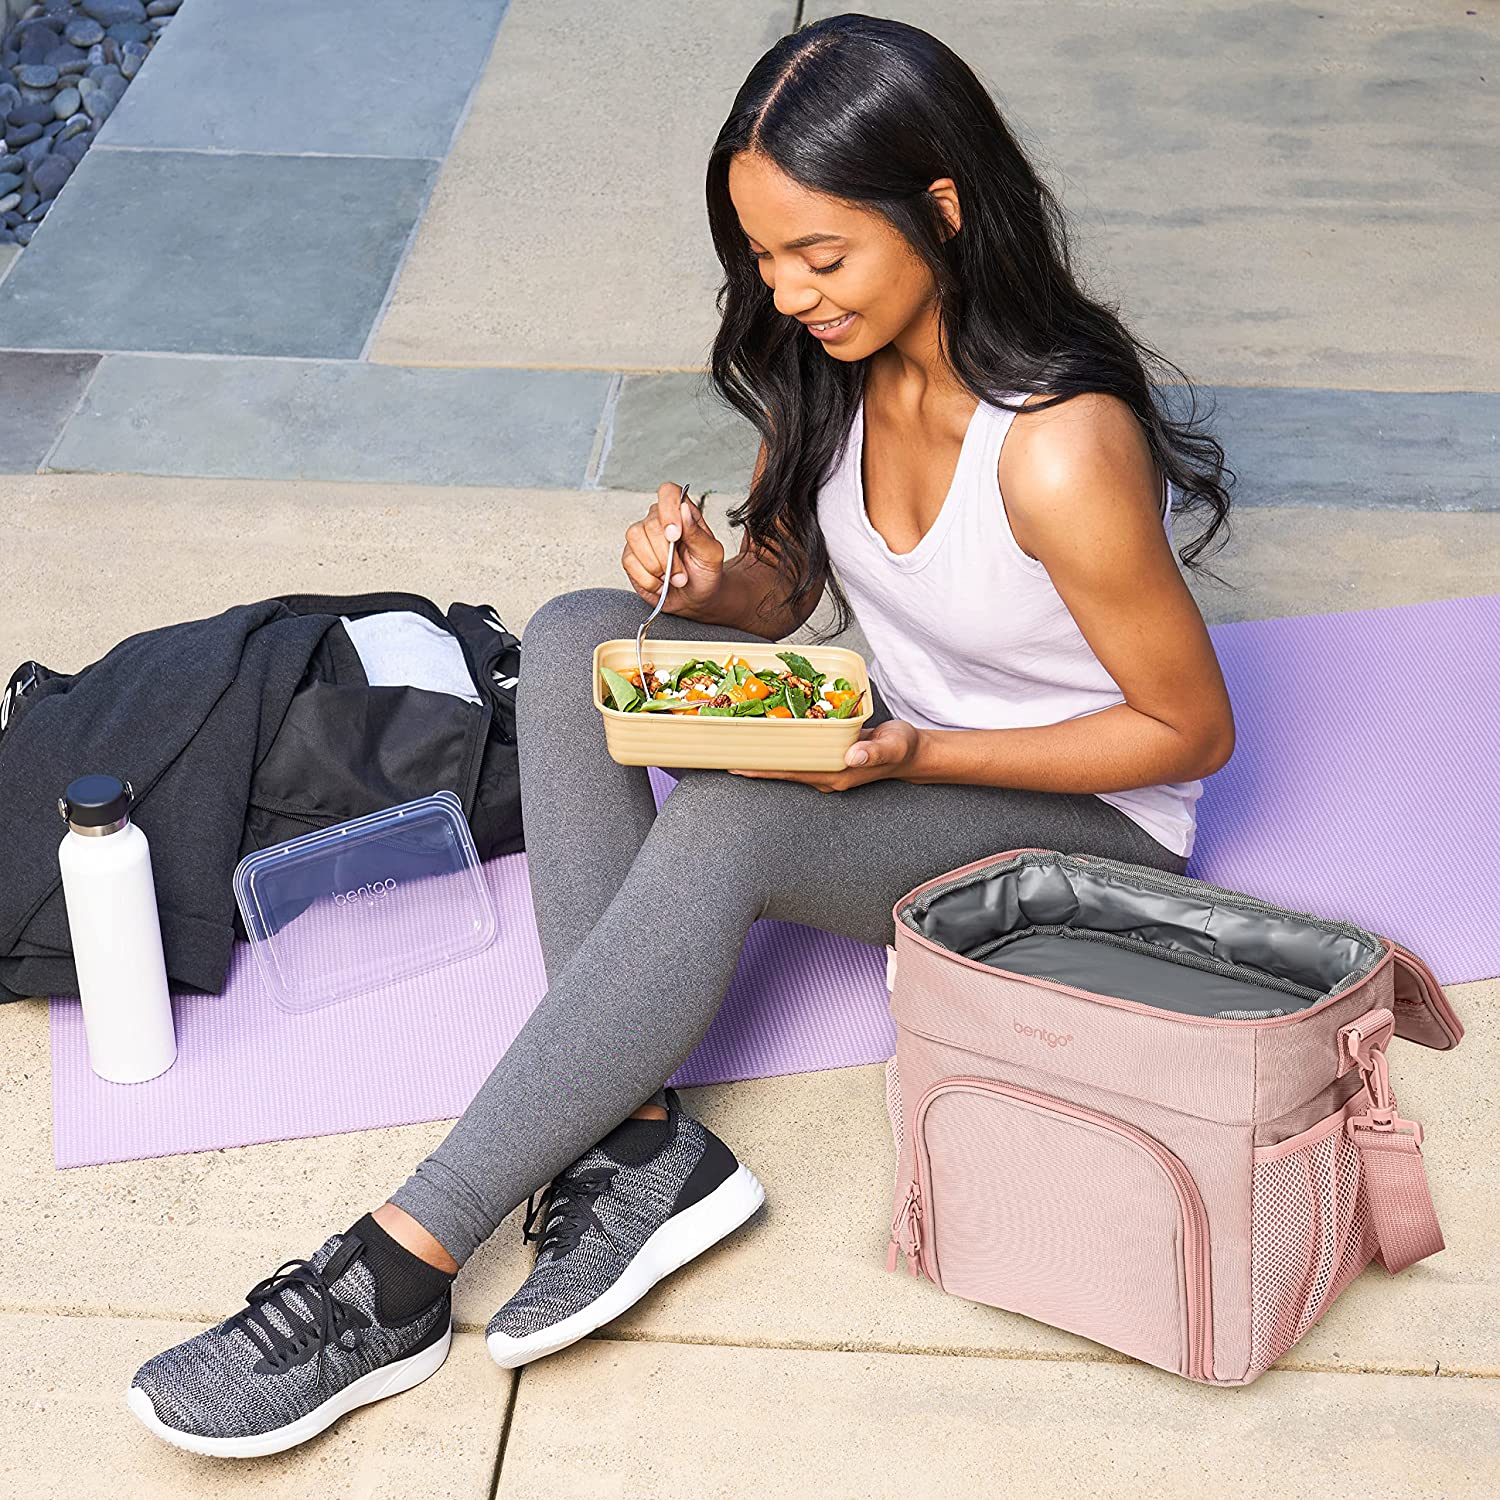  Bentgo® Deluxe Lunch Bag - Durable and Insulated Lunch